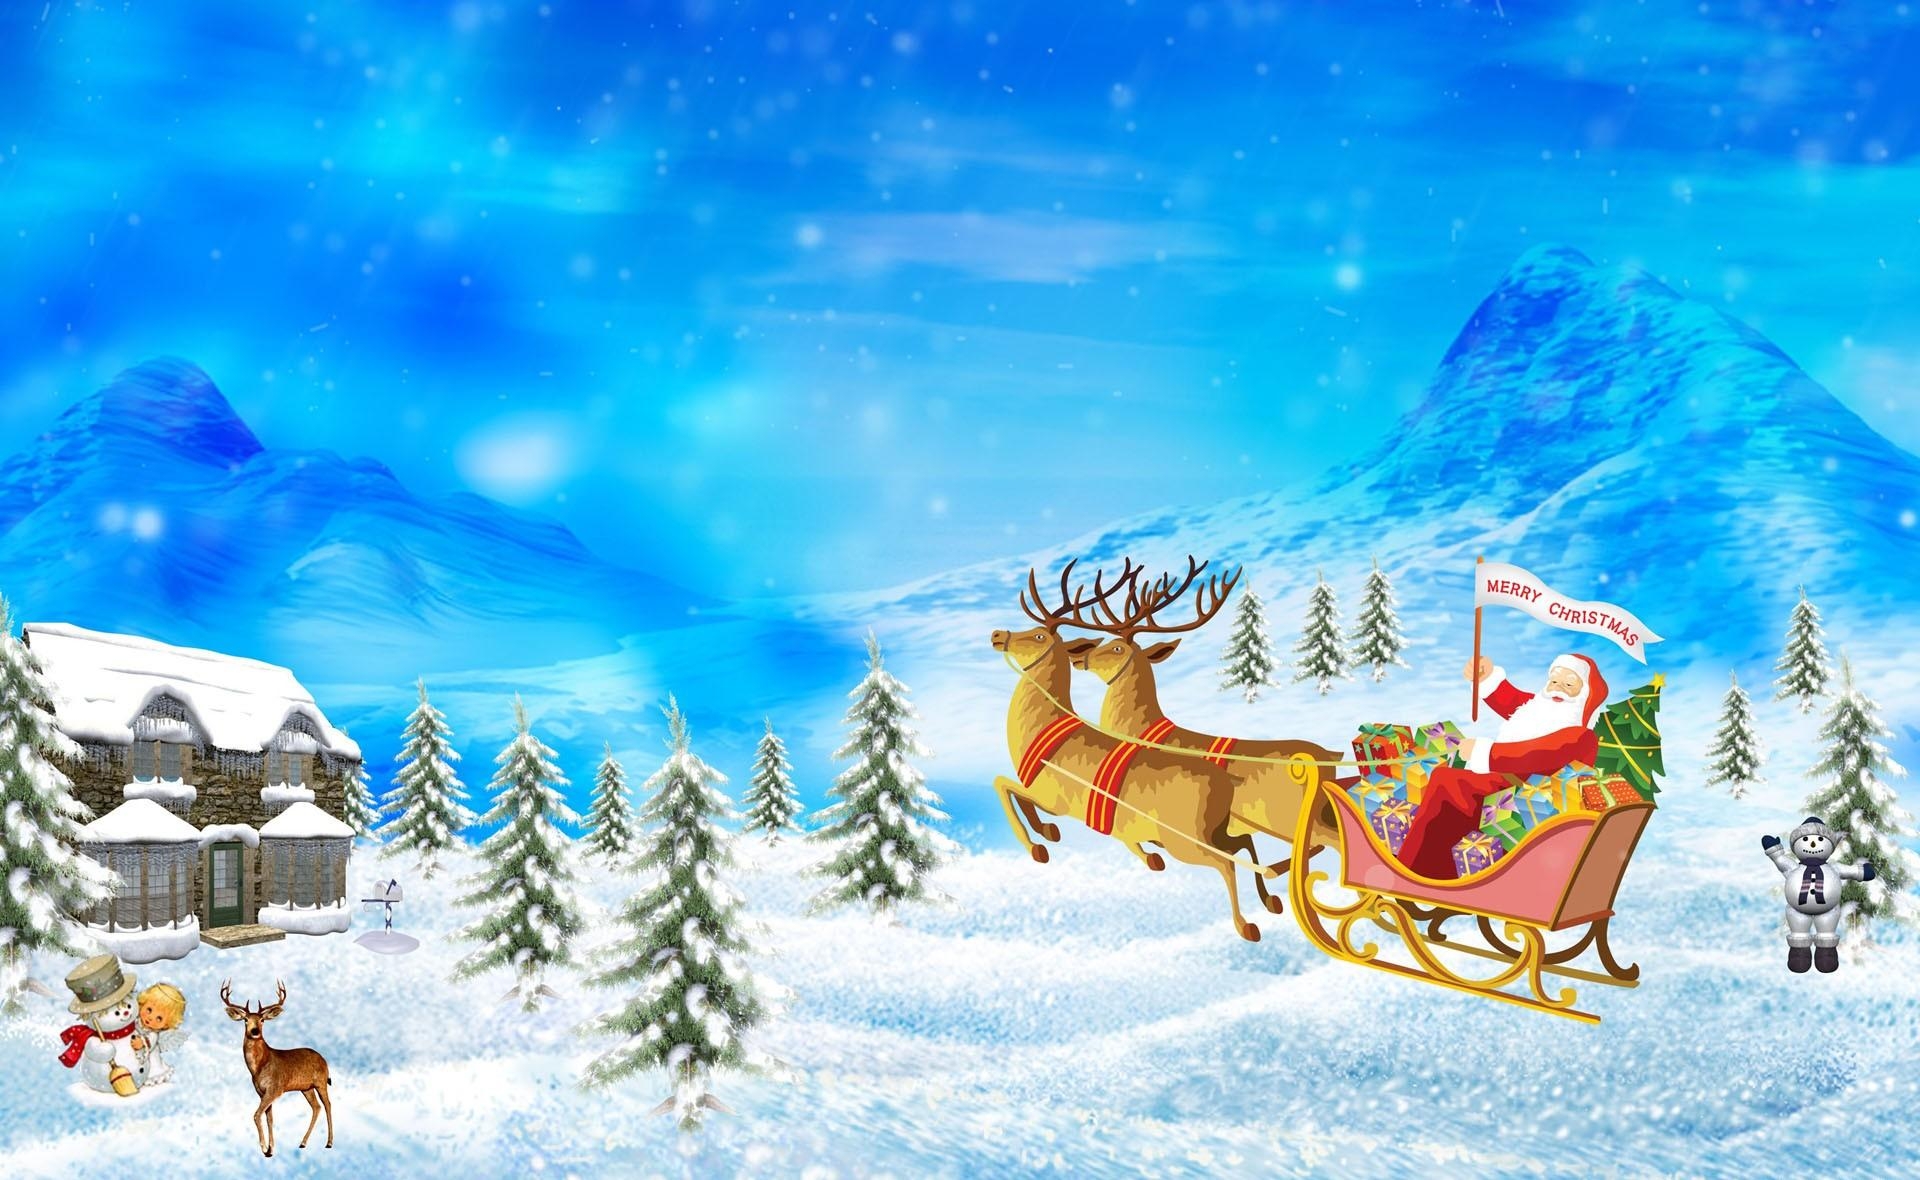 santa claus, presents, holidays, mountains, deers, christmas, holiday, house, sleigh, sledge, gifts